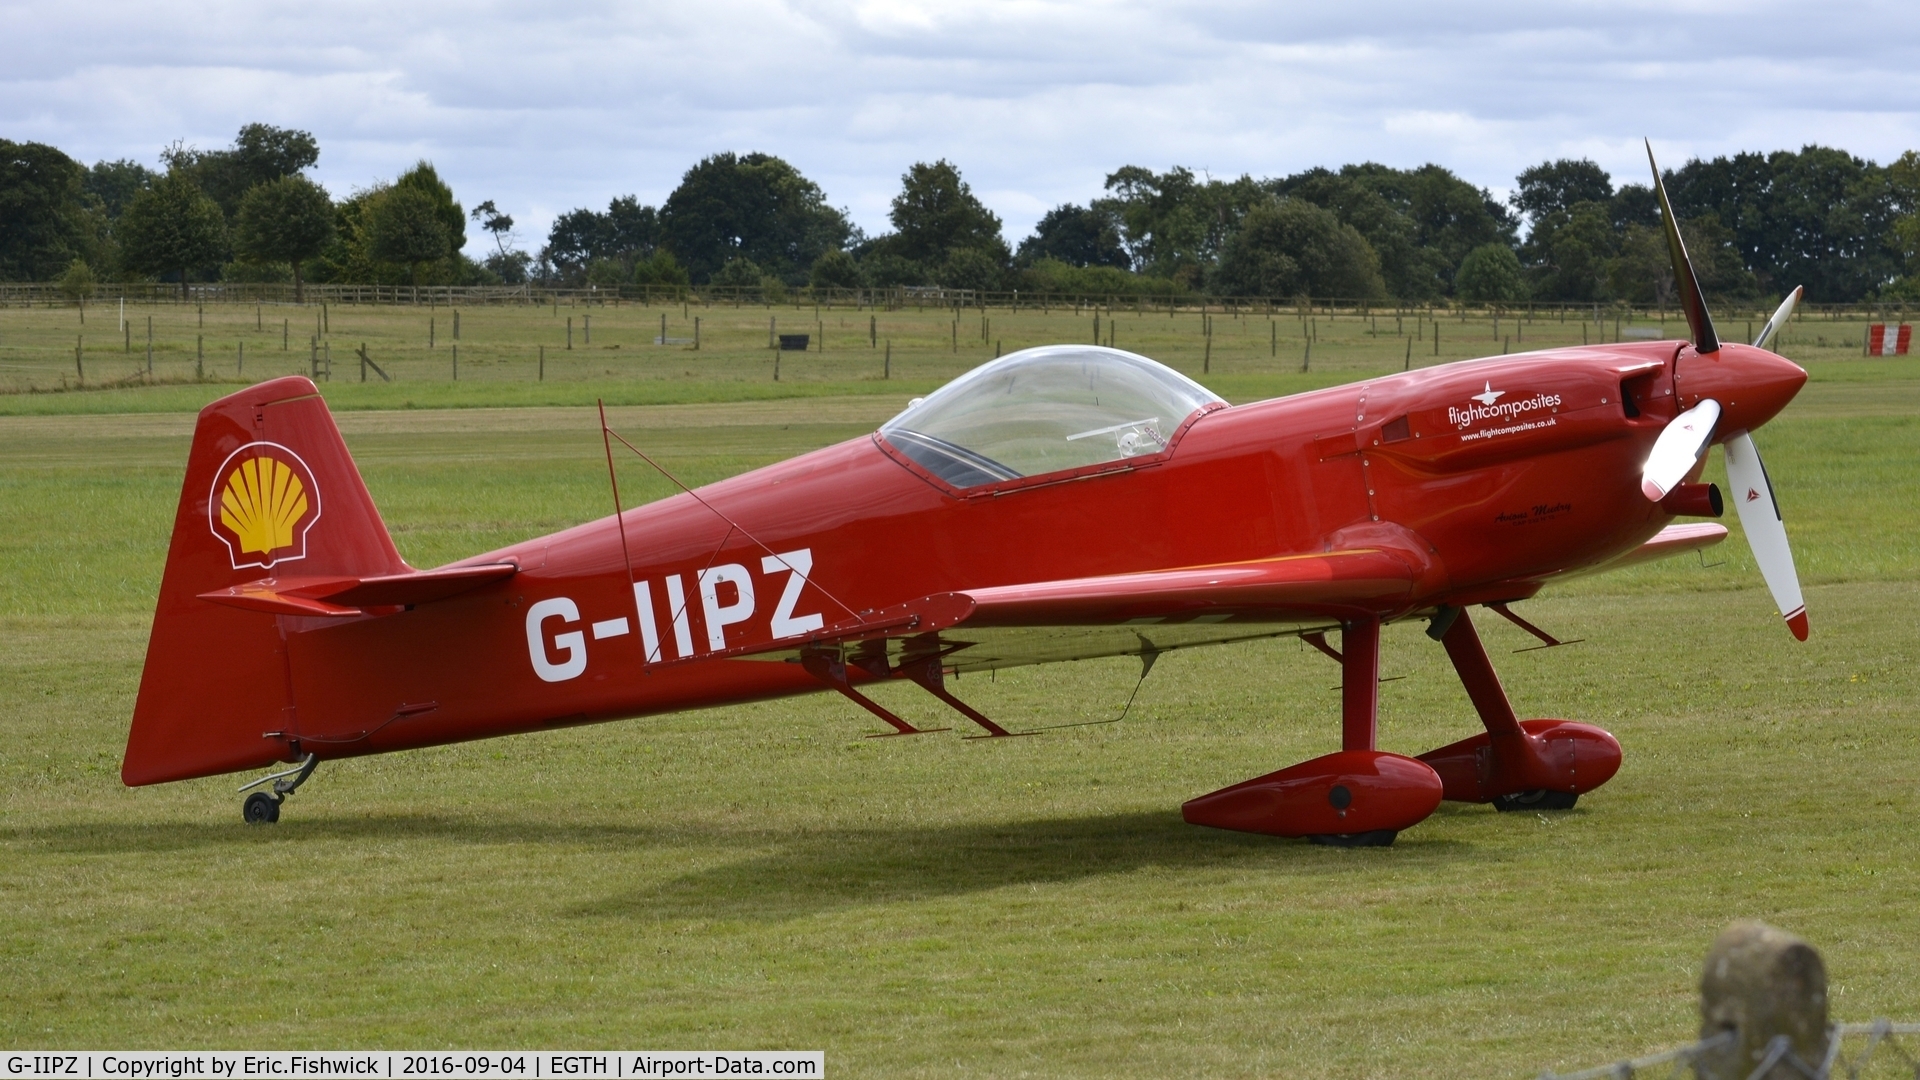 G-IIPZ, 1996 Mudry CAP-232 C/N 12, 2. G-IIPZ visiting The Shuttleworth Collection.